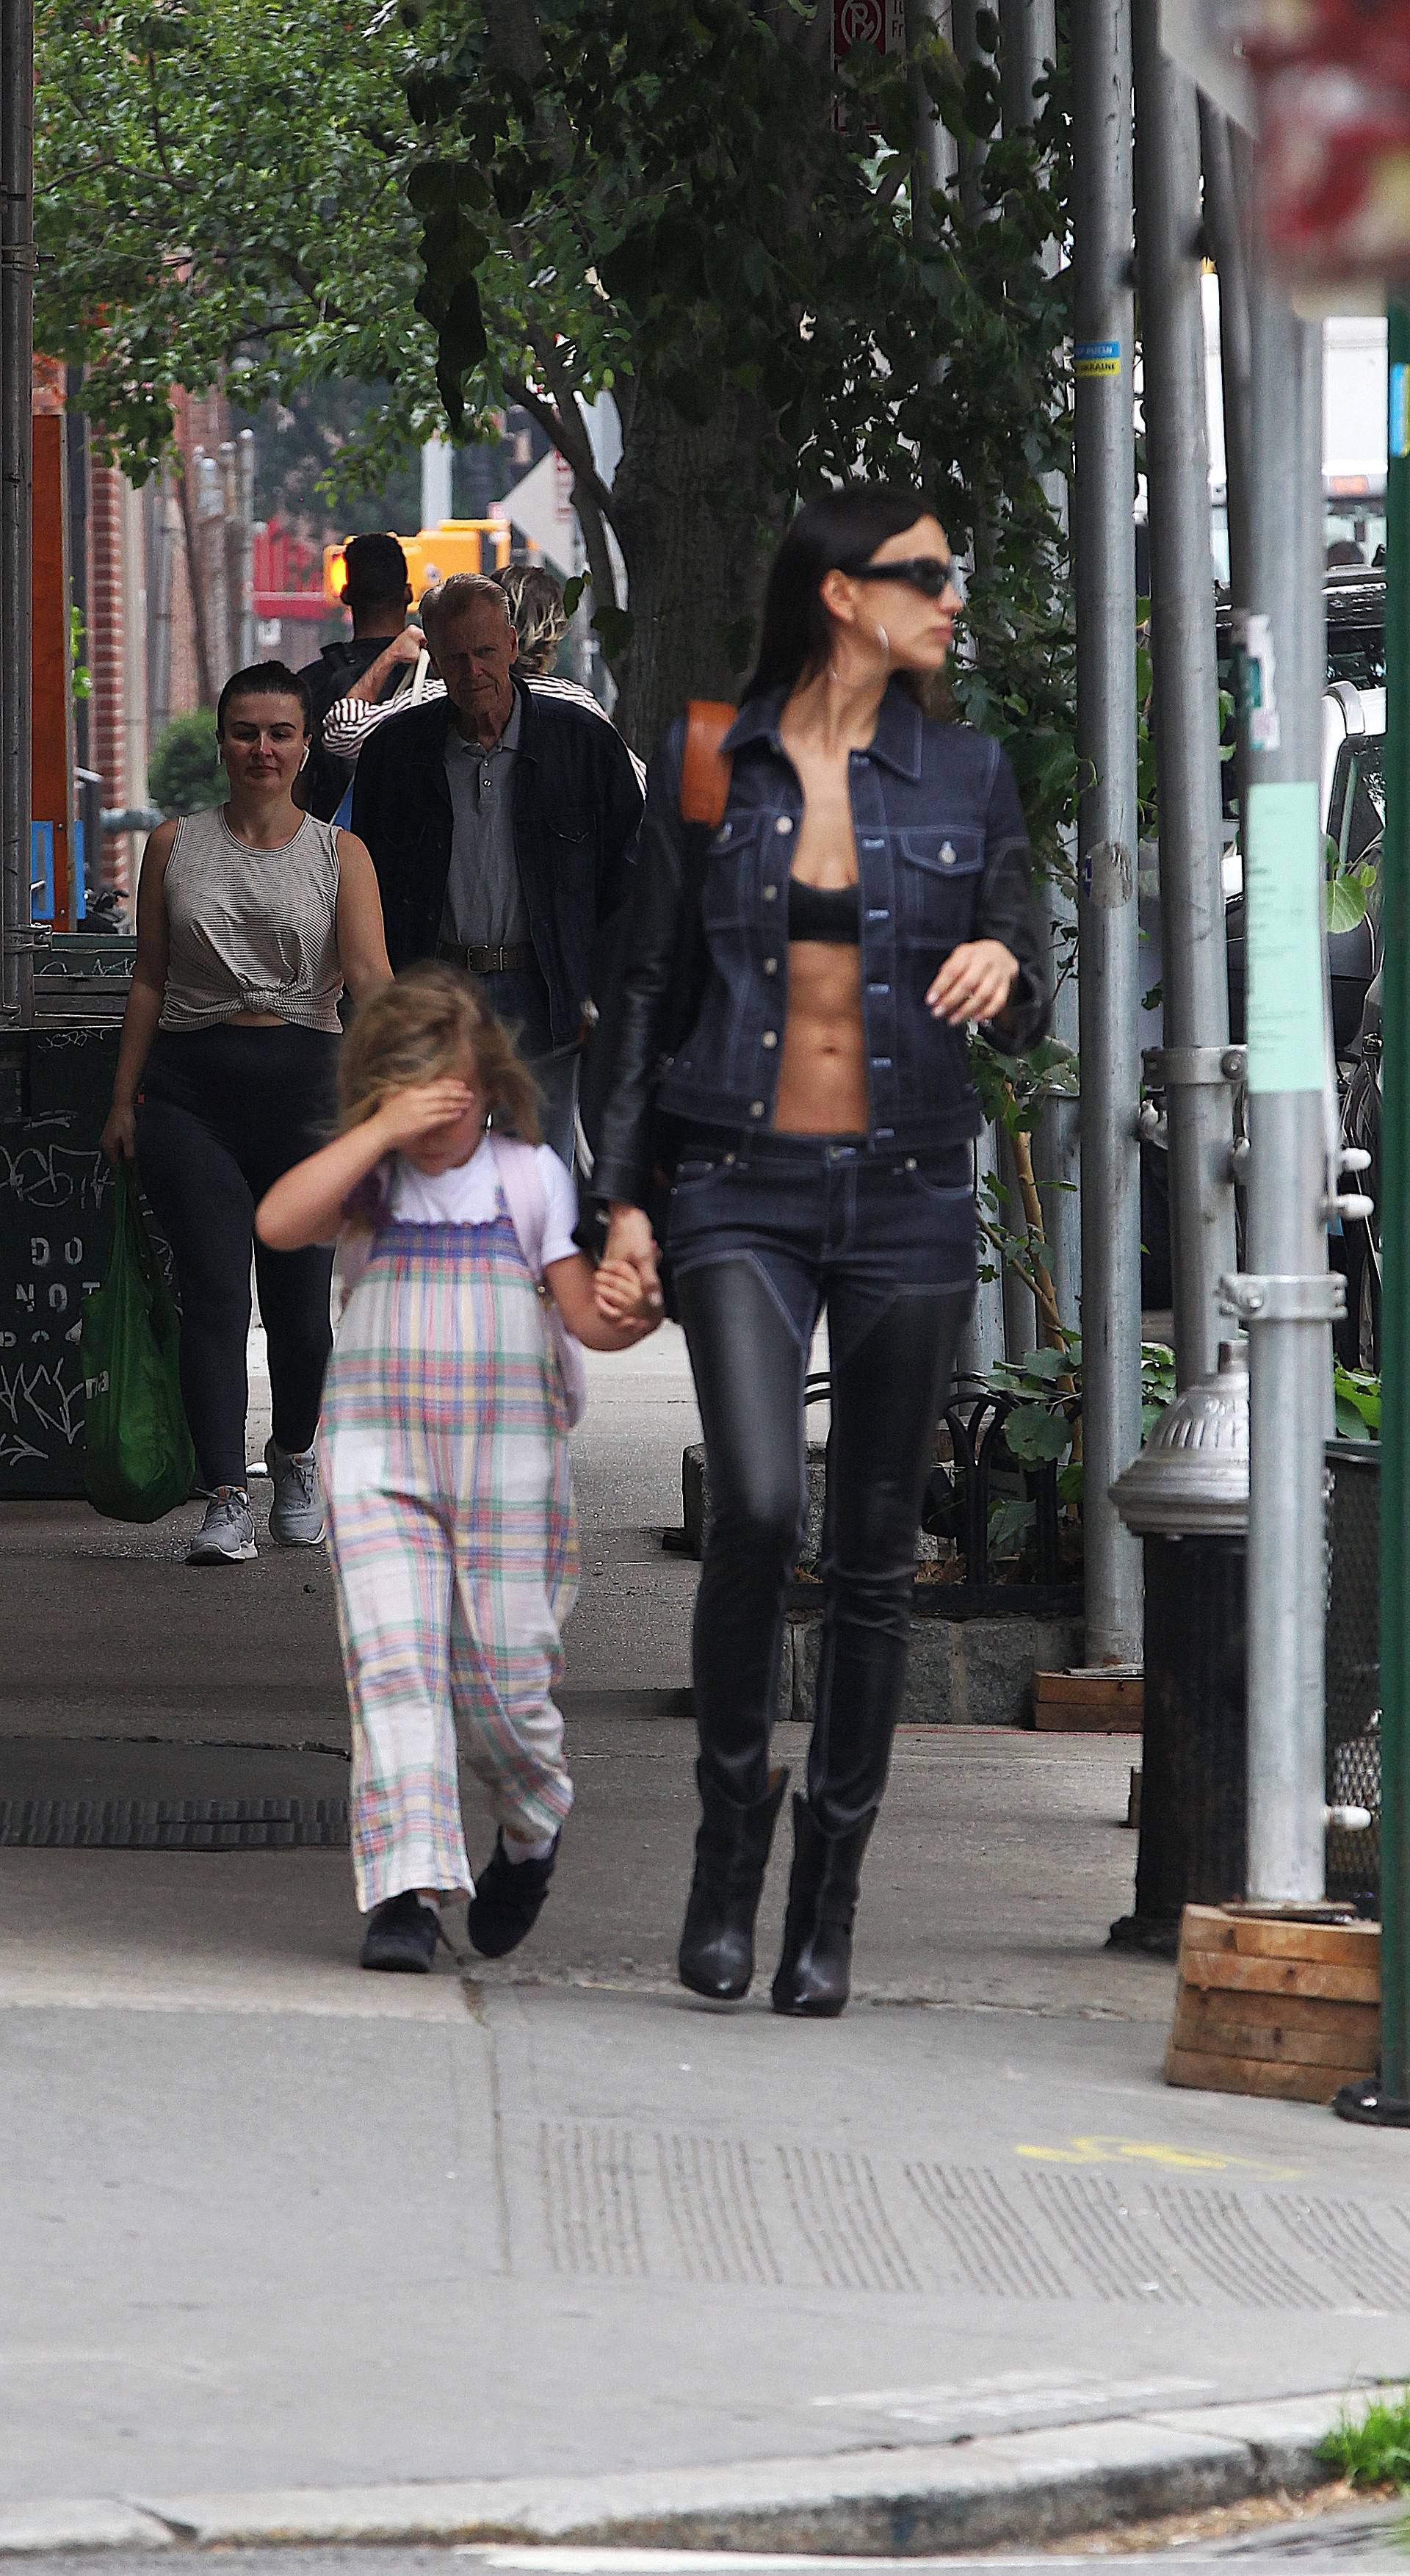 Irina Shayk flashes her bra and taut tummy in double-denim outfit to pick up daughter Lea from school in NYC